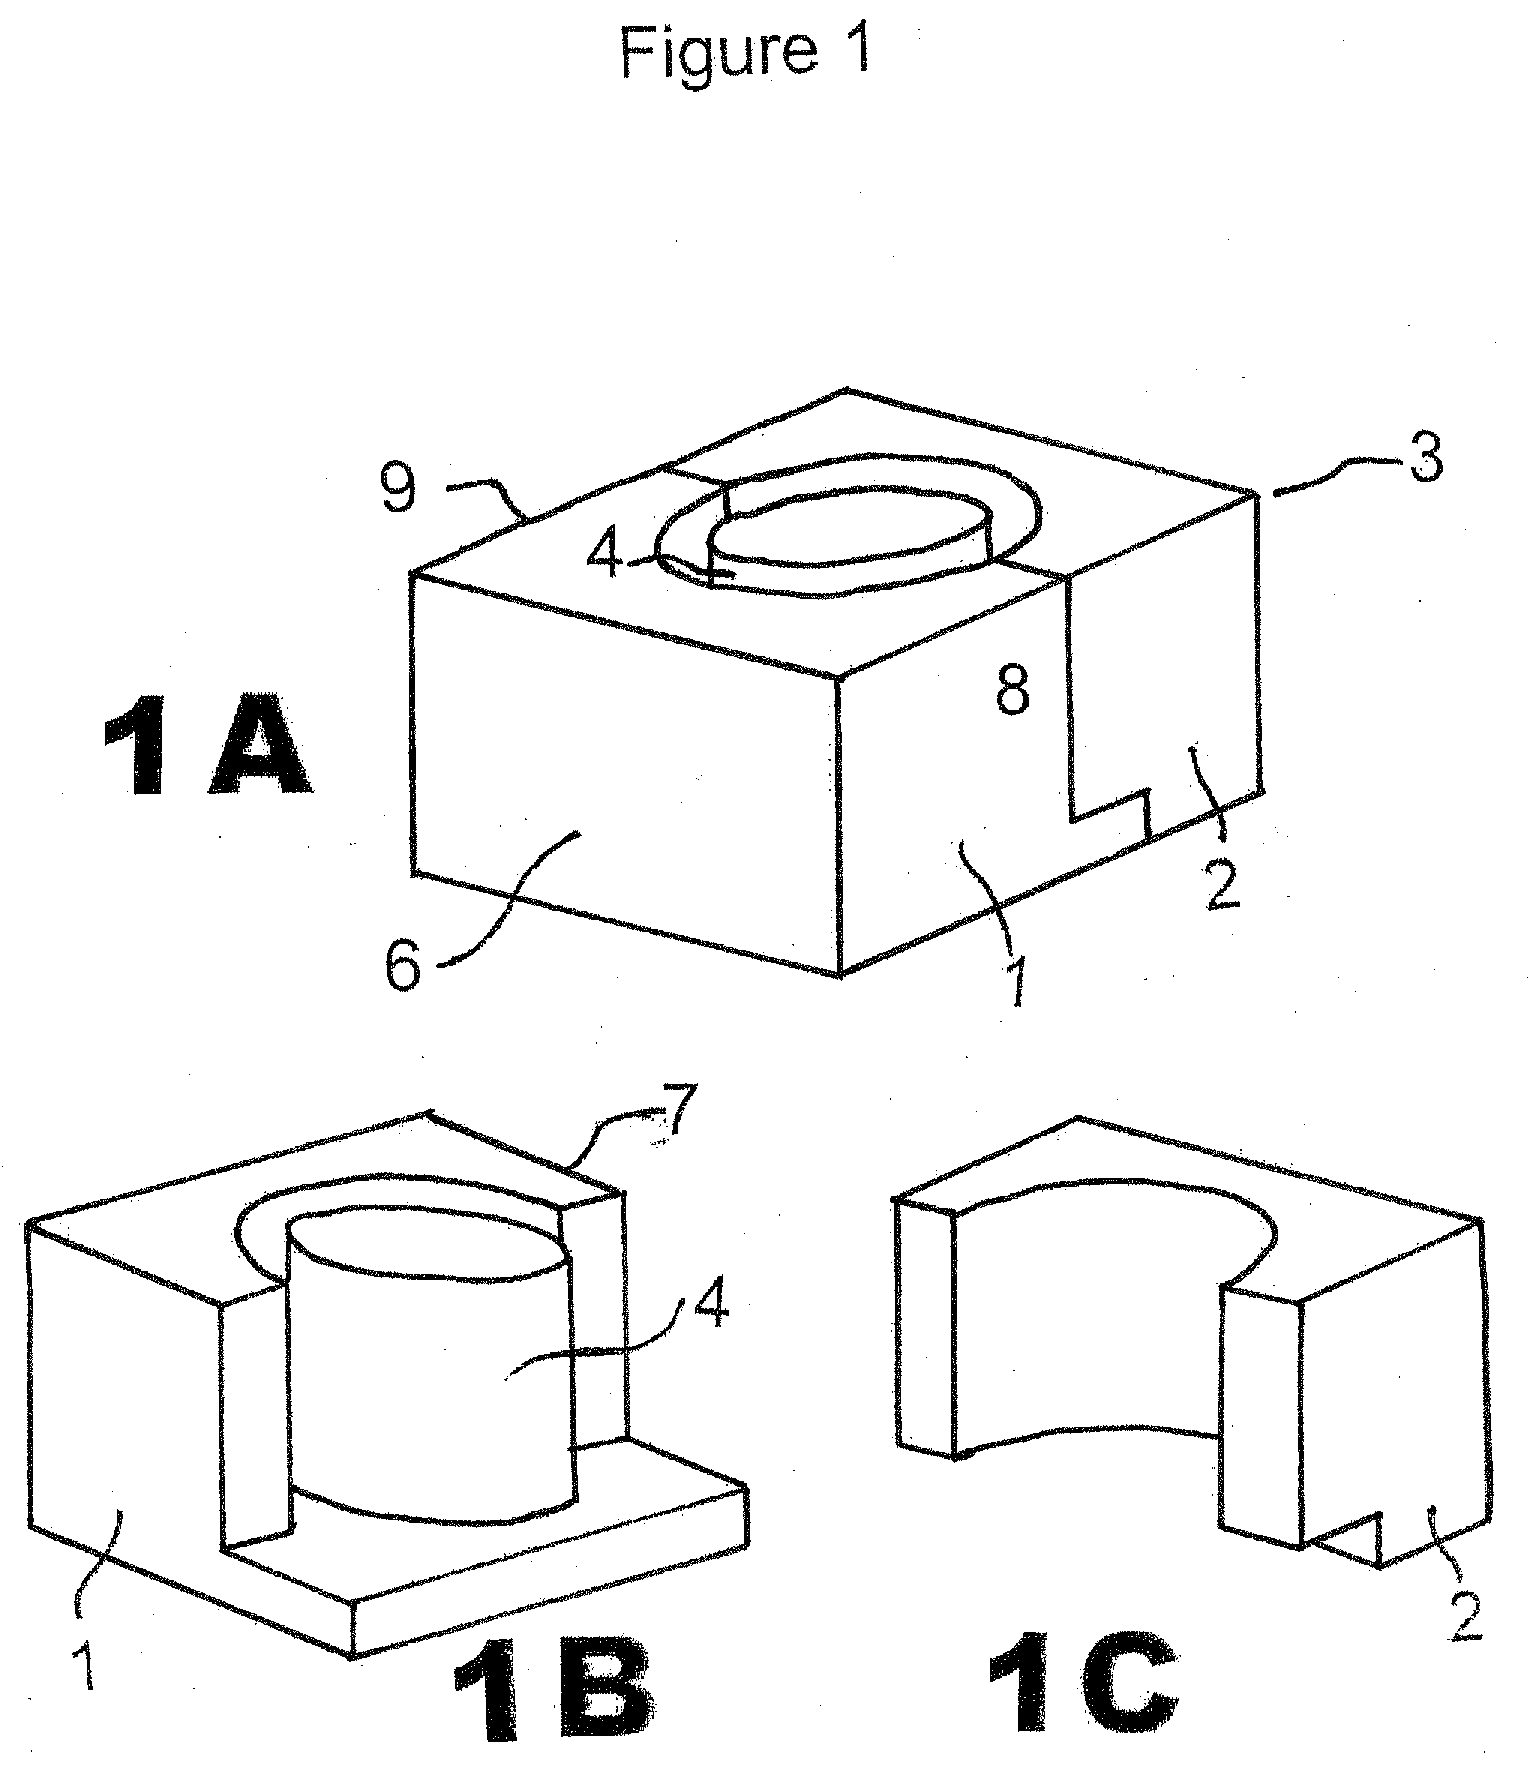 Methods for molding interbody devices in situ